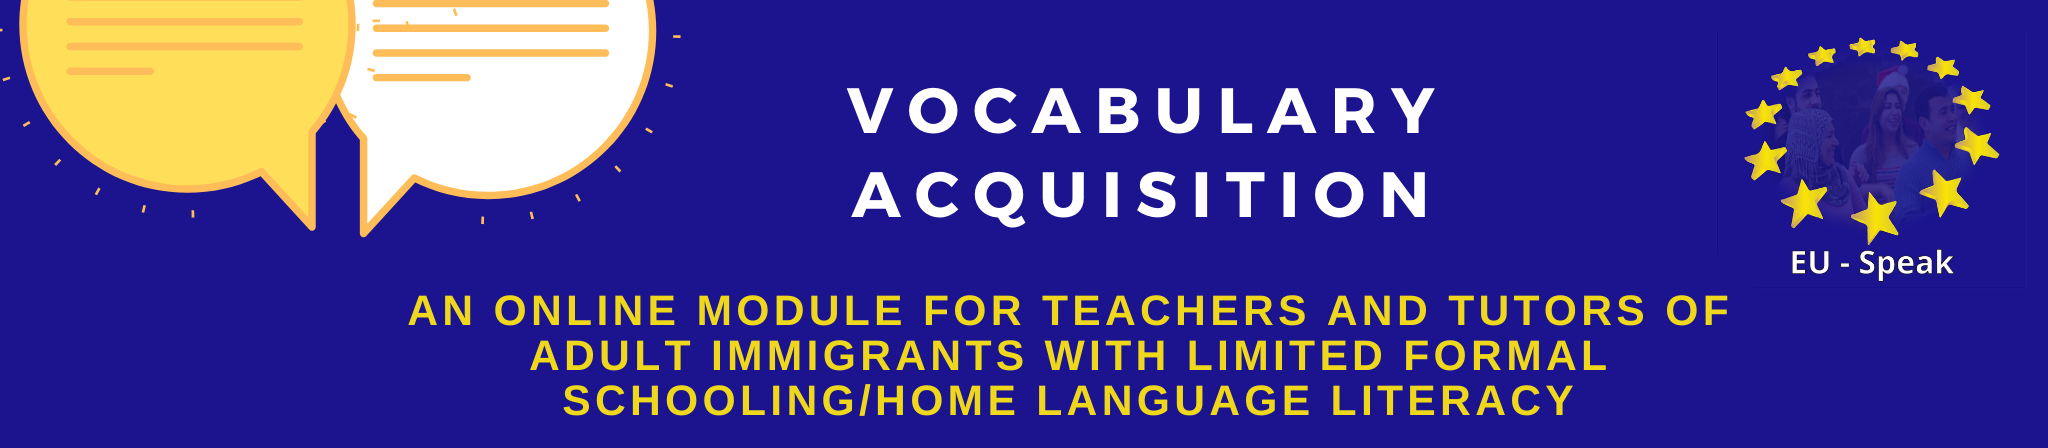 Vocabulary Acquisition Web Banner